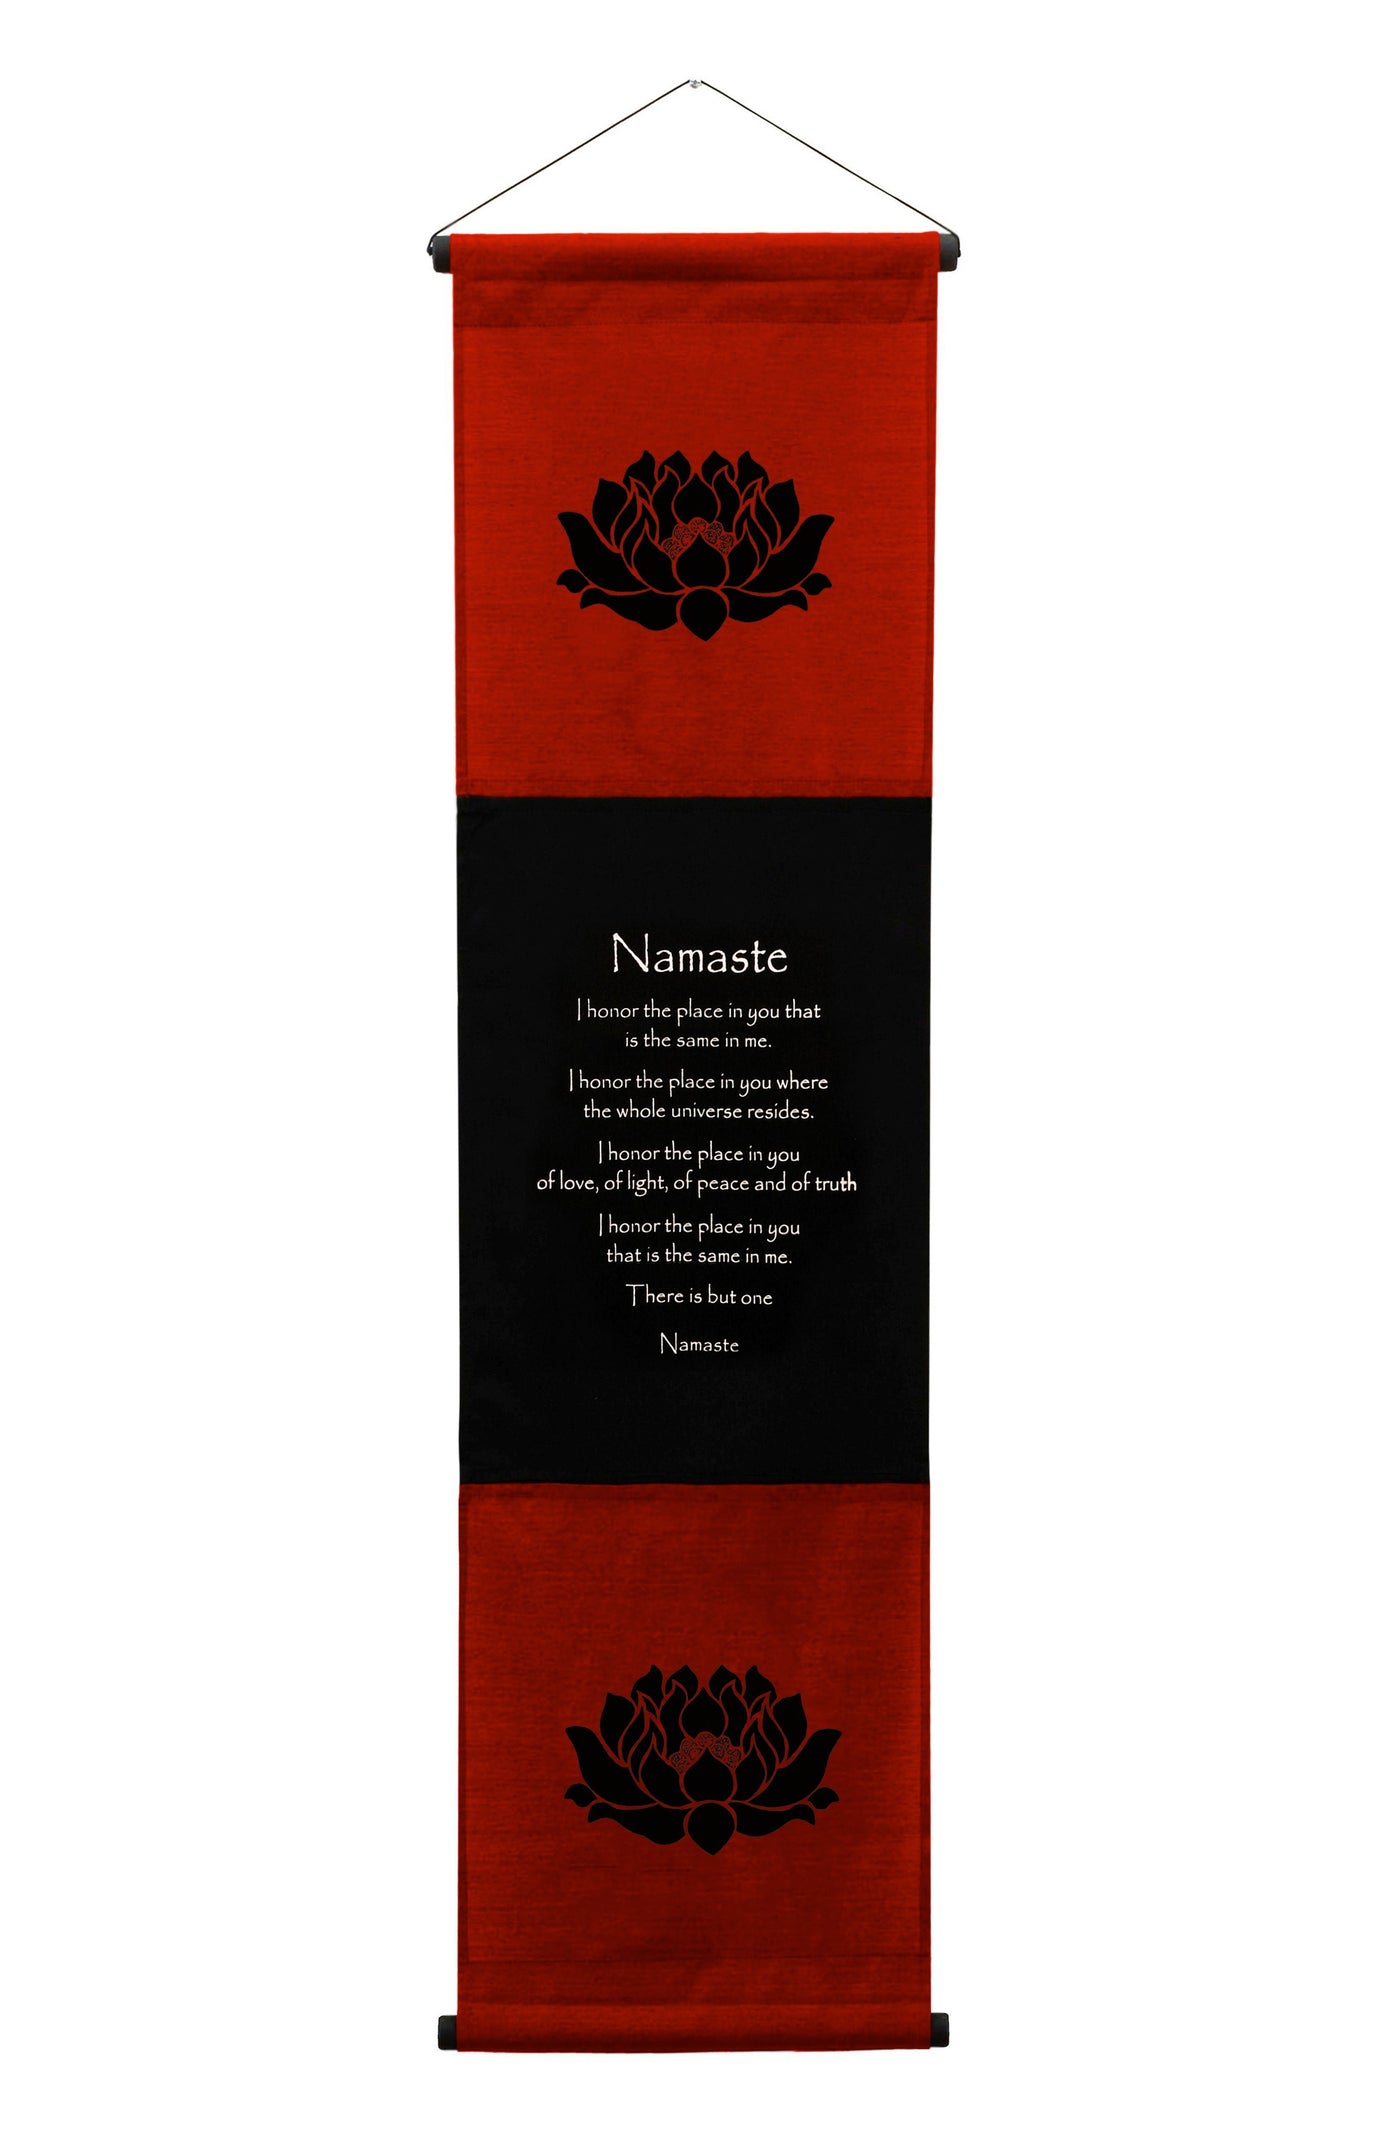 Inspirational Wall Decor Namaste Banner Art, Inspiring Quote Wall Hanging Scroll, Affirmation Motivational Uplifting Message, Thought Saying Tapestry